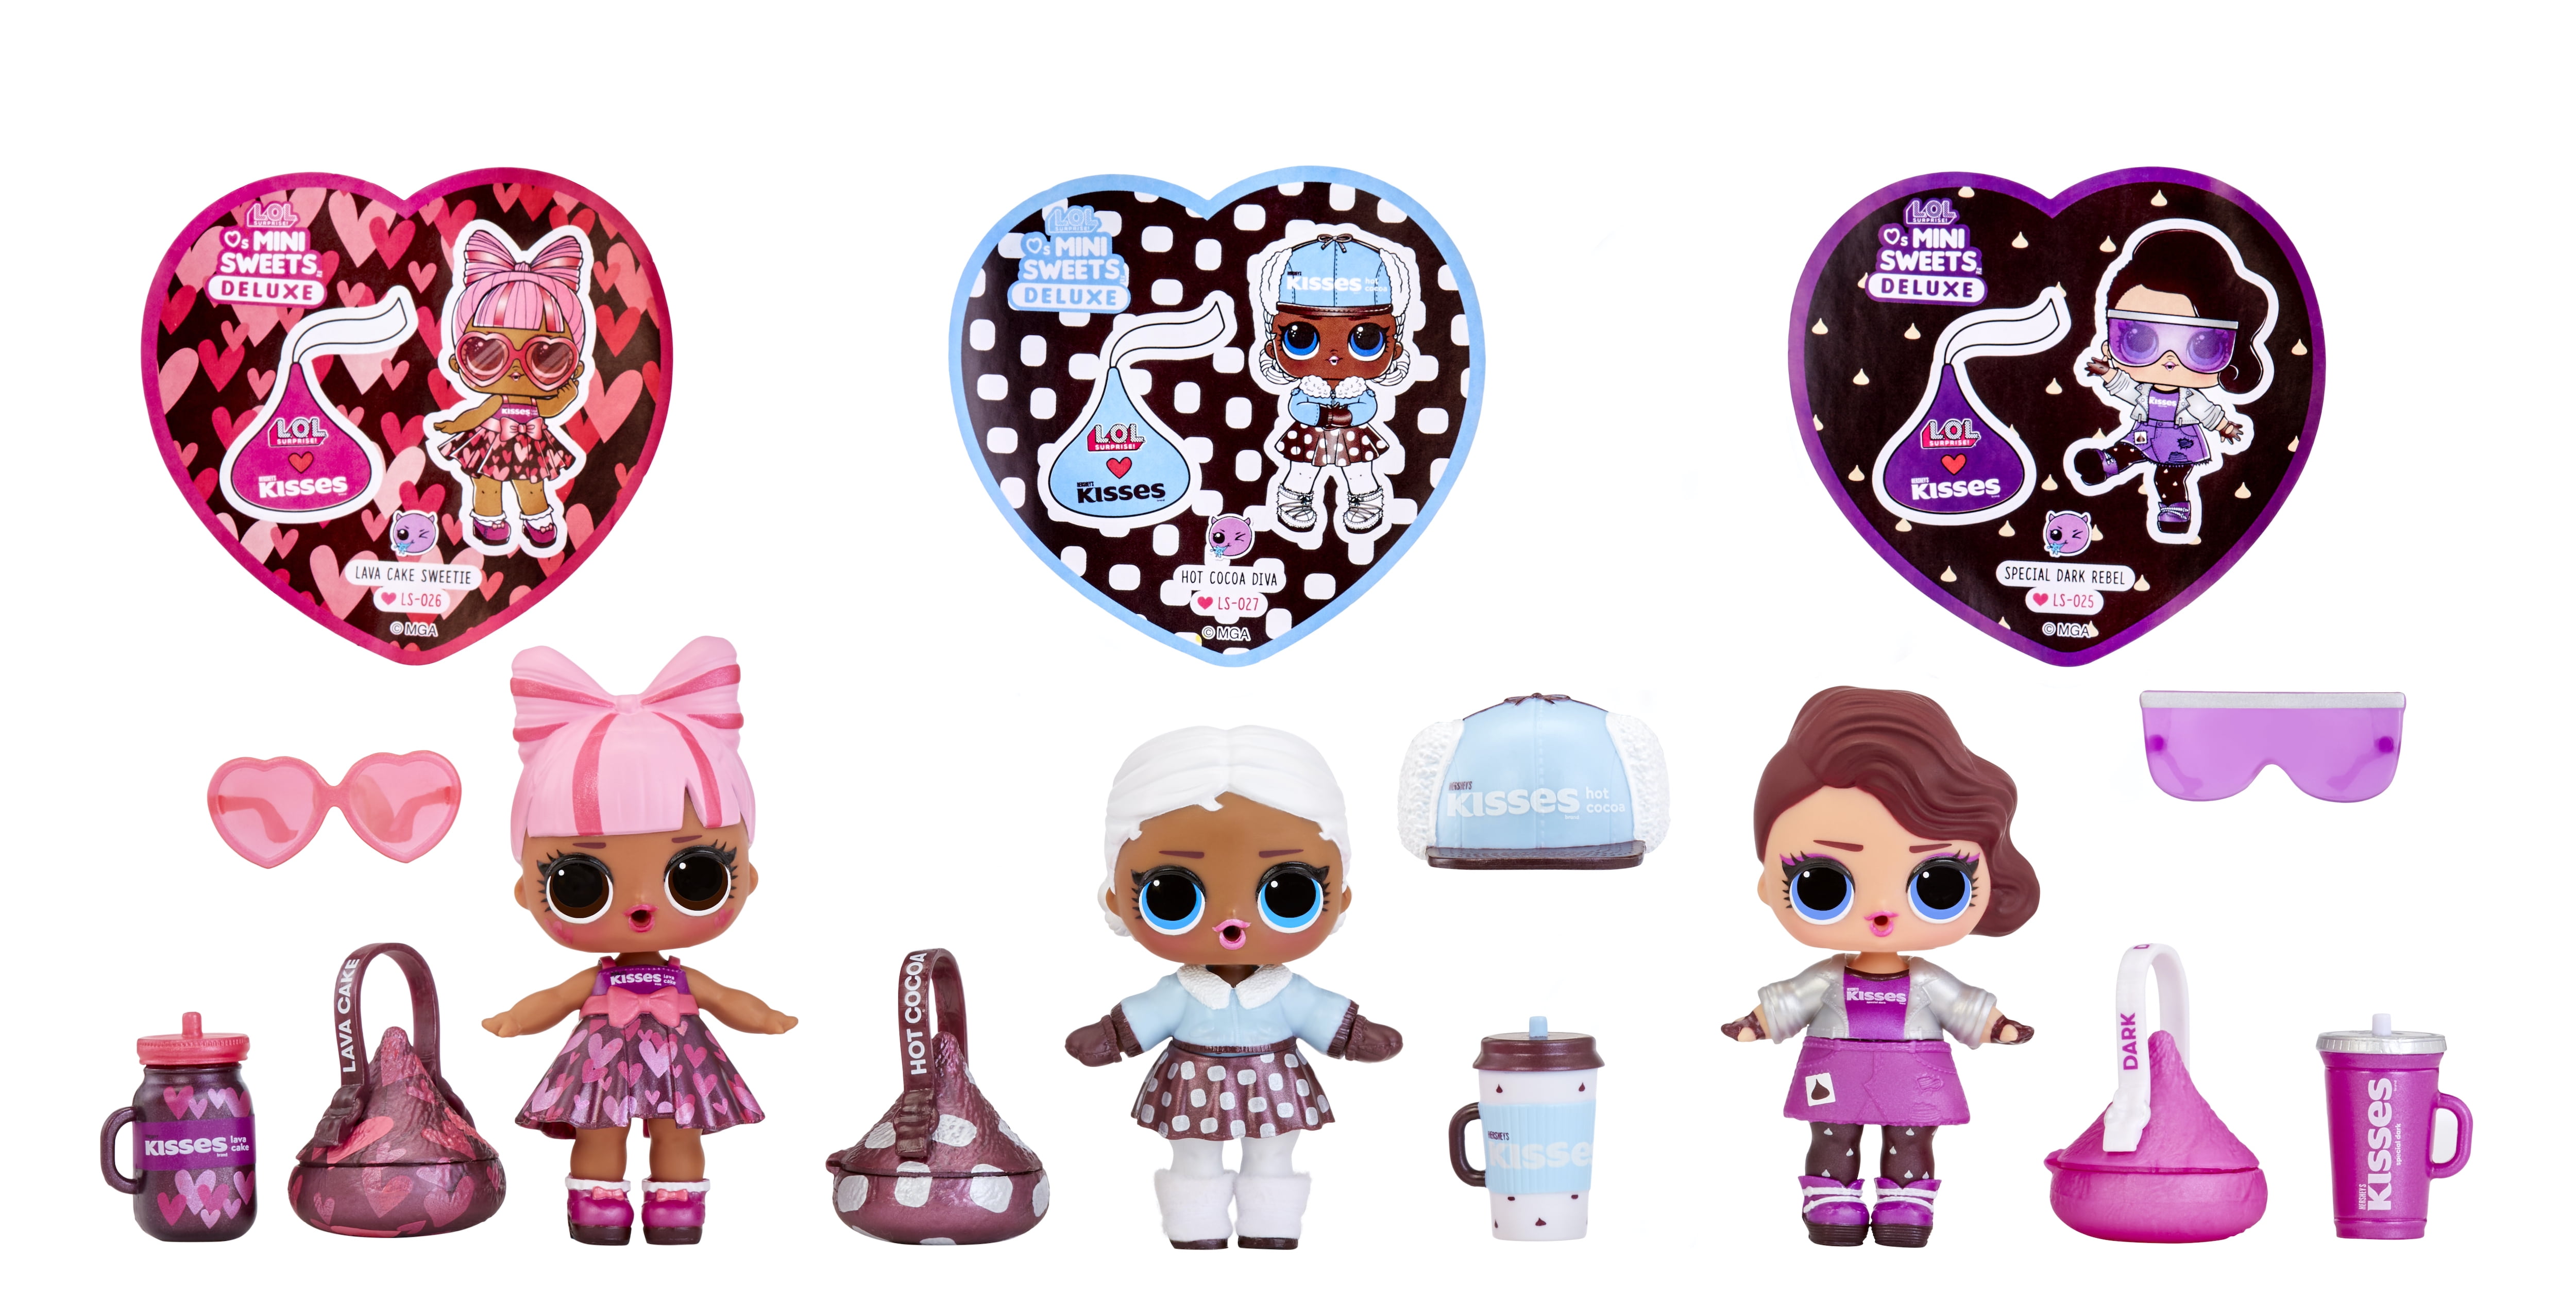 L.O.L Surprise! LOL Surprise Loves Mini Sweets Hershey’s Kisses Deluxe Pack with over 20 Surprises, Accessories, Collectible Dolls